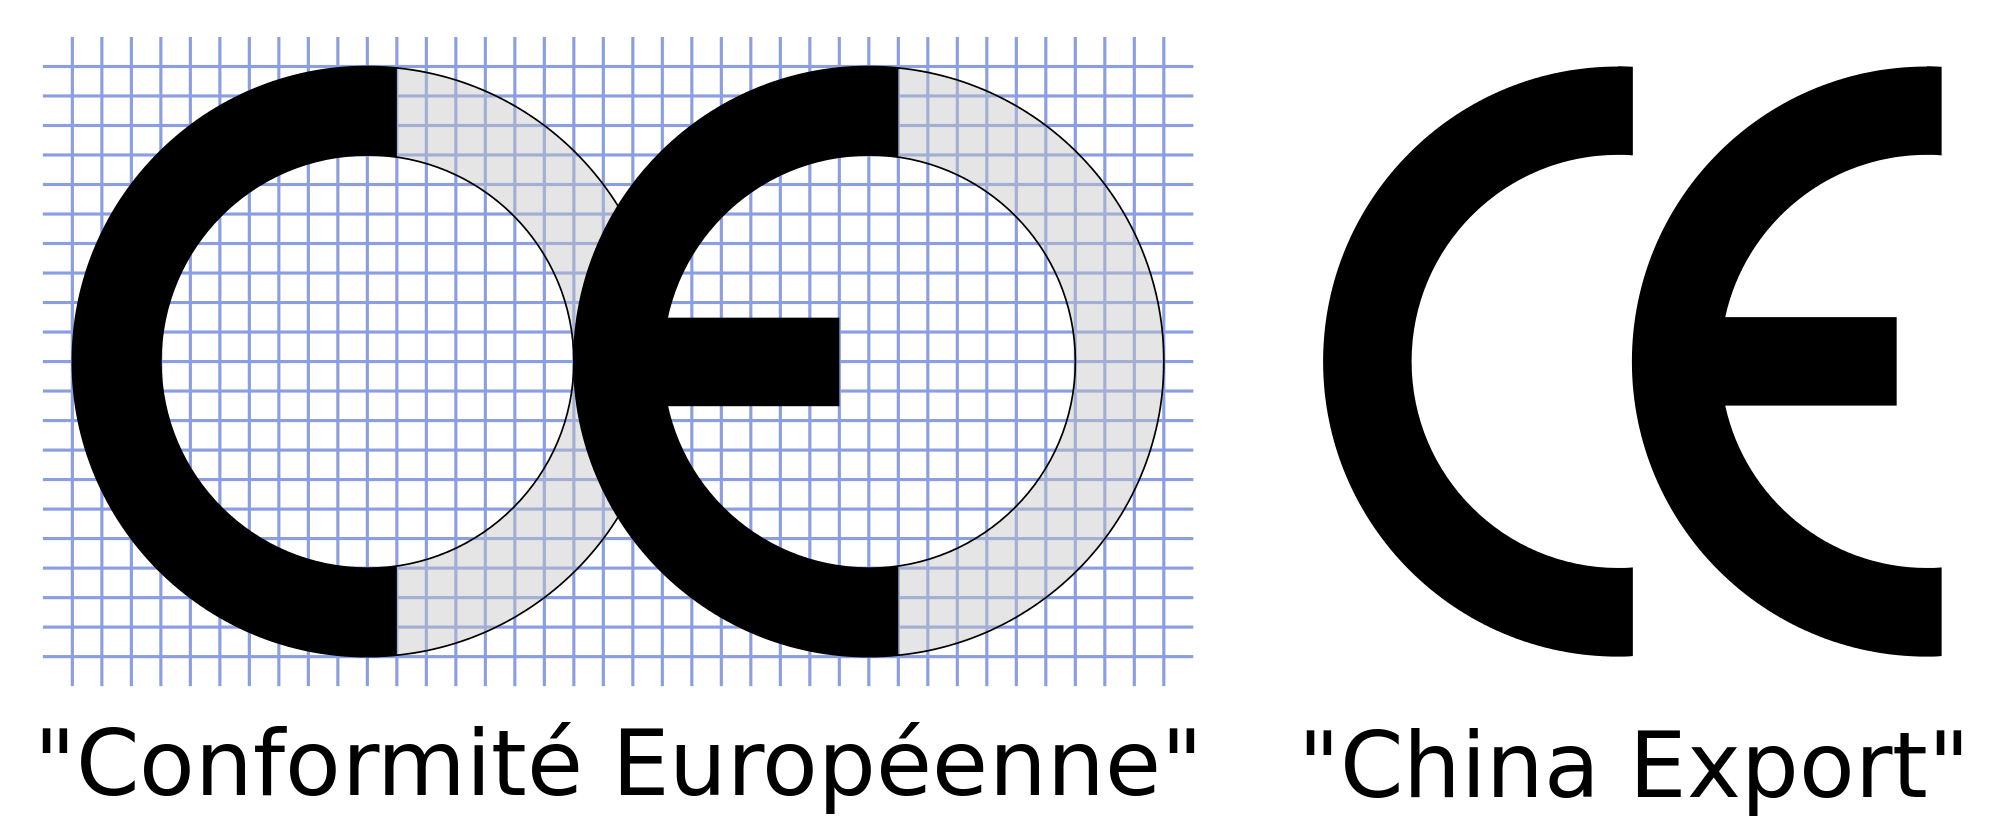 Comparison_of_two_used_CE_marks.png